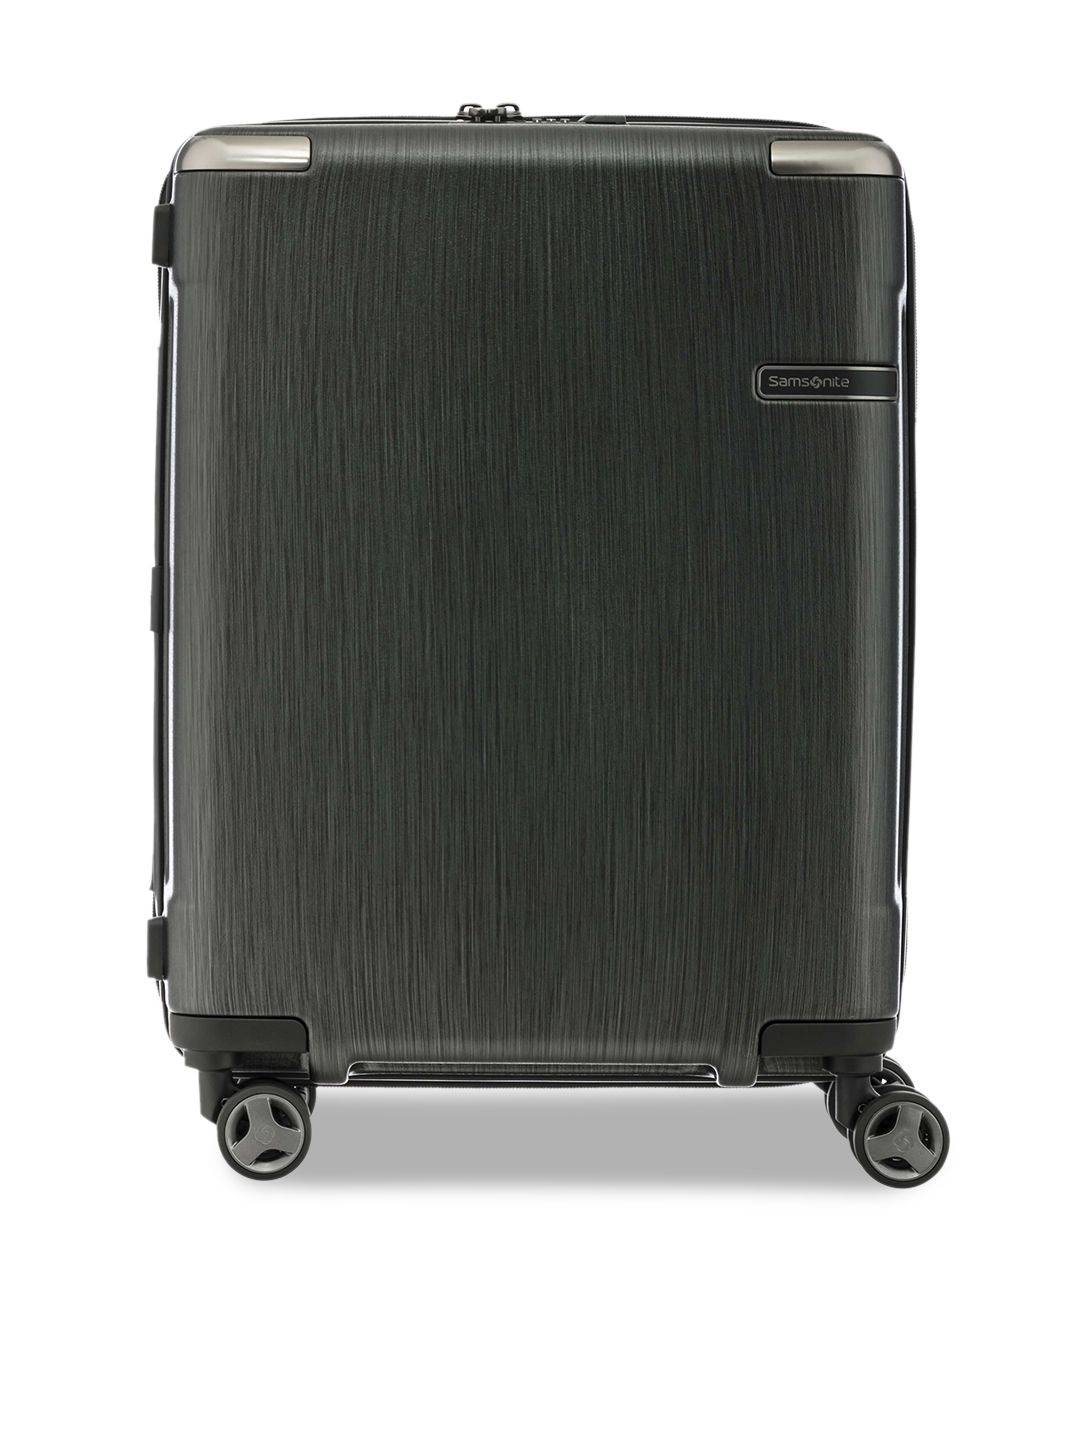 Samsonite Black Solid Hard Sided Cabin Trolley Suitcase Price in India